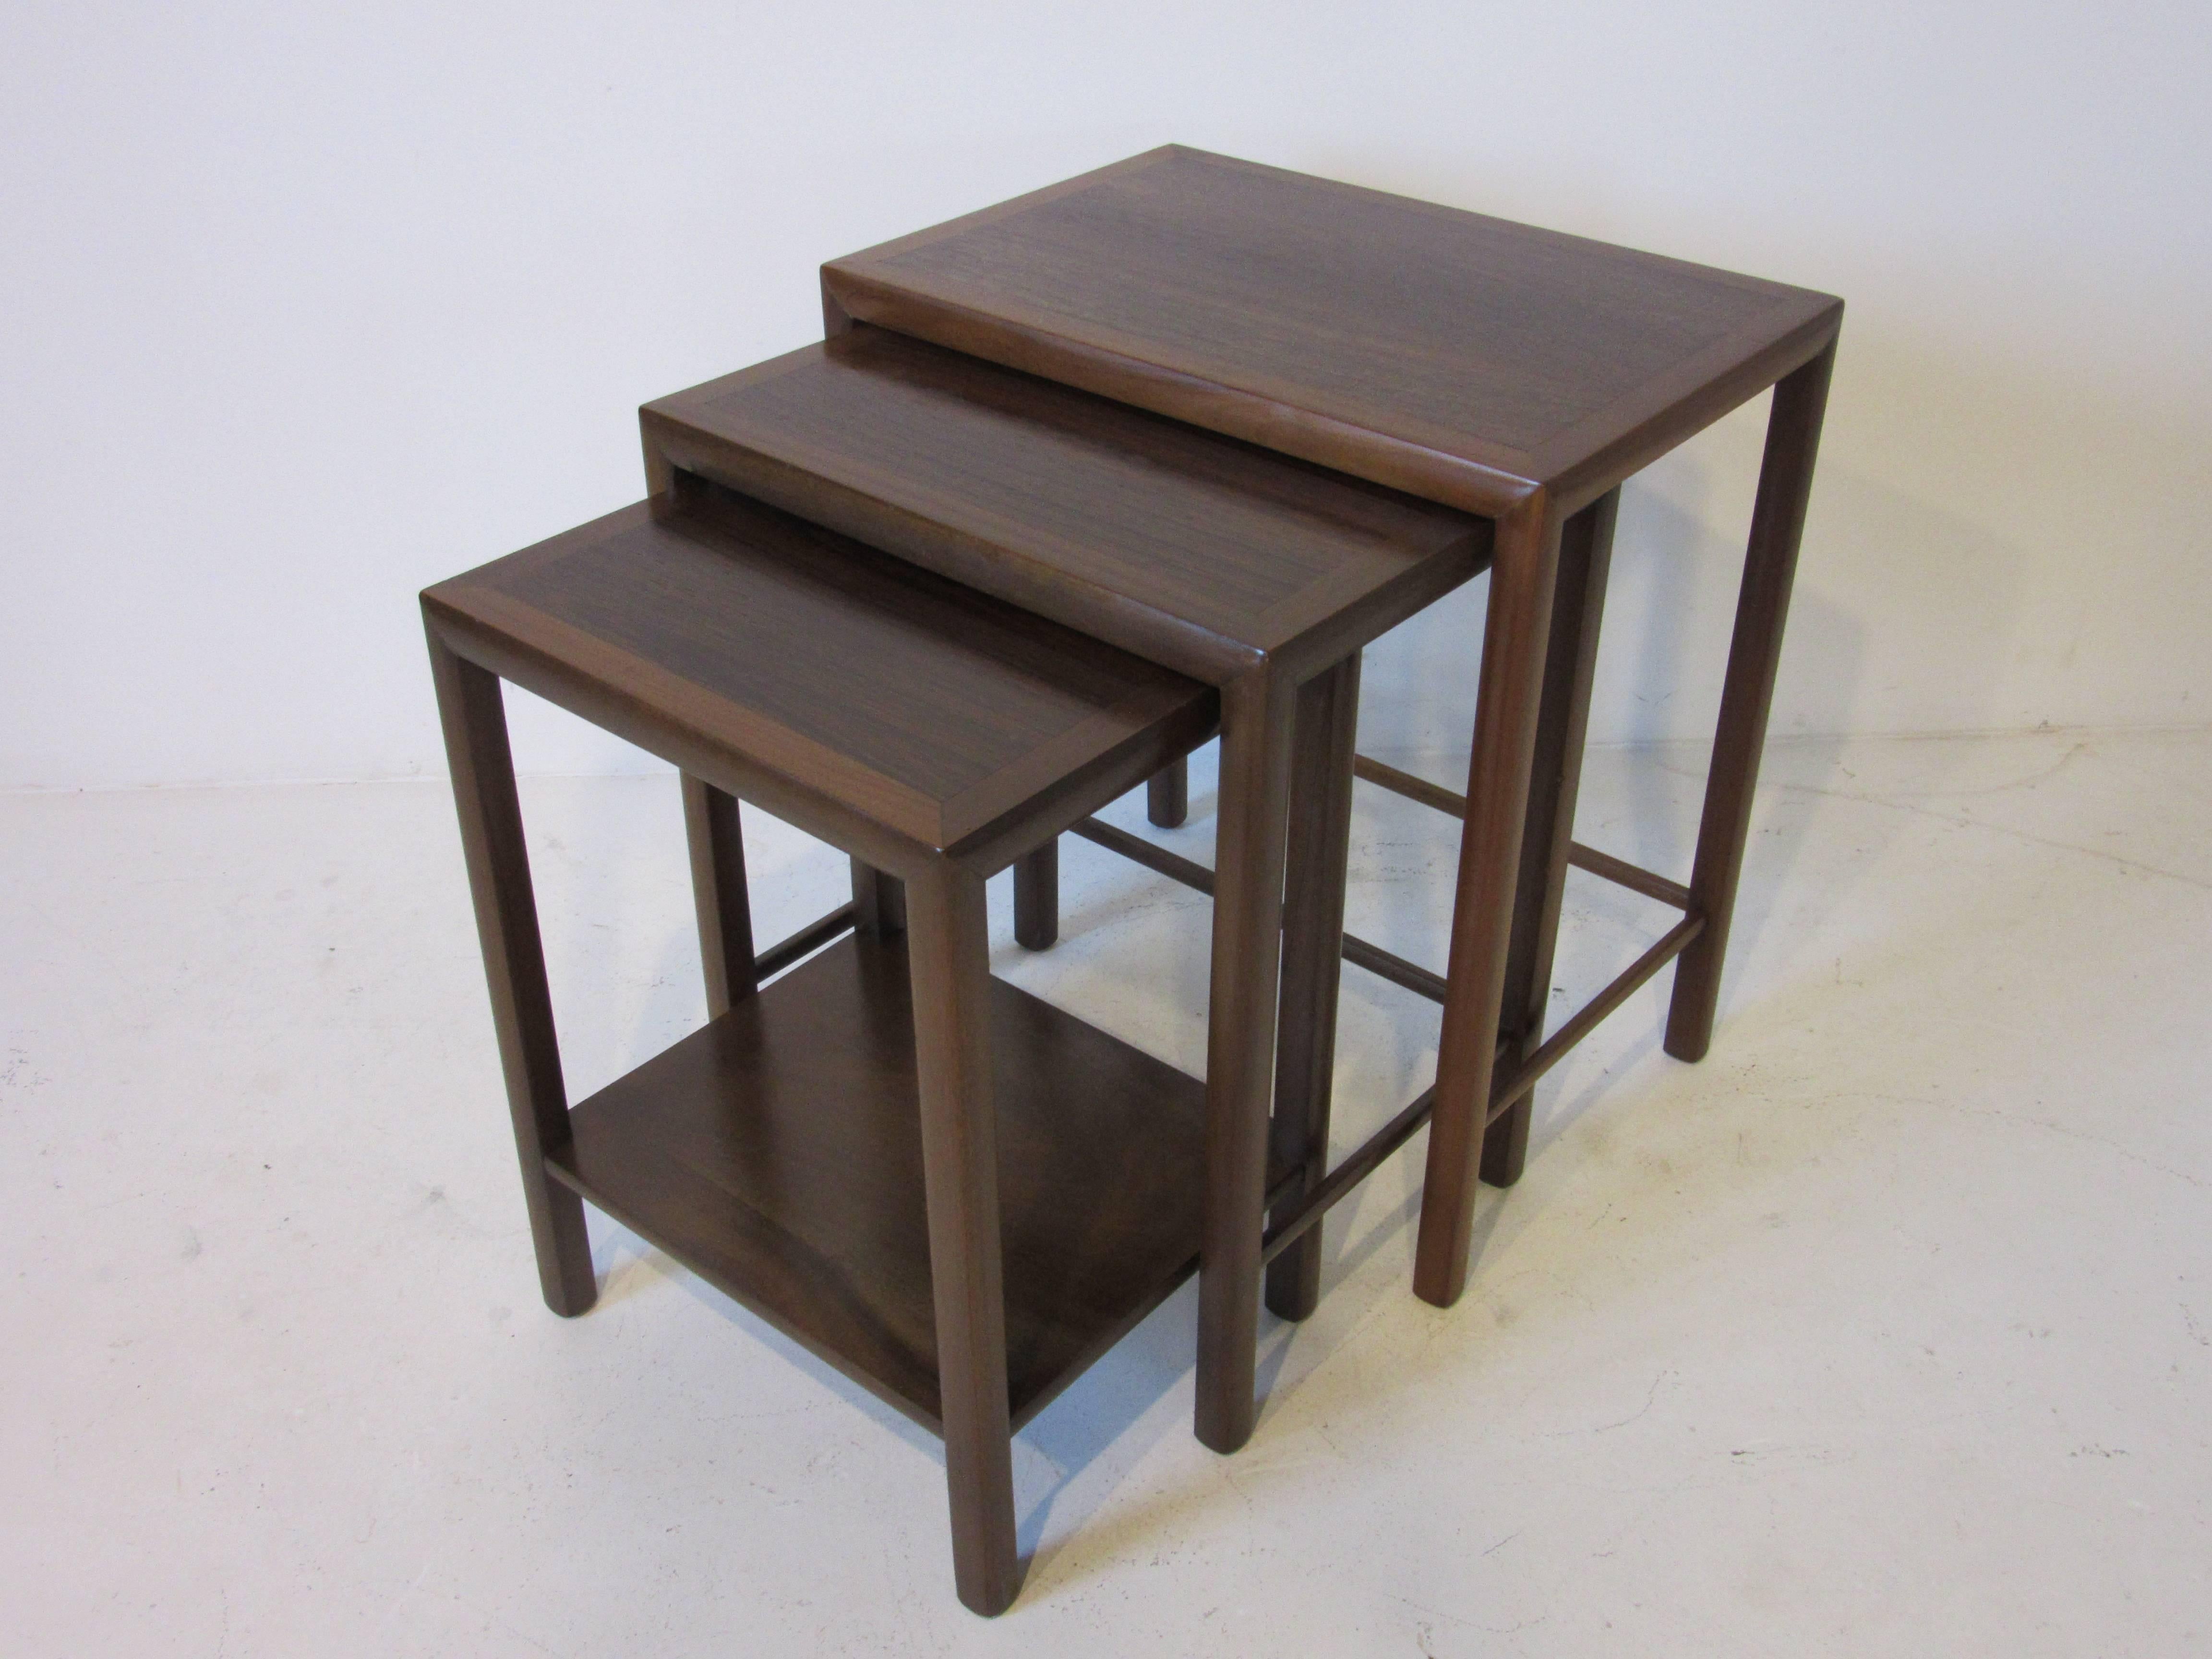 A set of three nesting tables with dark walnut frames and inserted rose wood table tops. The smallest table has a shelve to the bottom and the others have all matching wood stretchers all neatly fitting together. Manufacturers imprint to the bottom